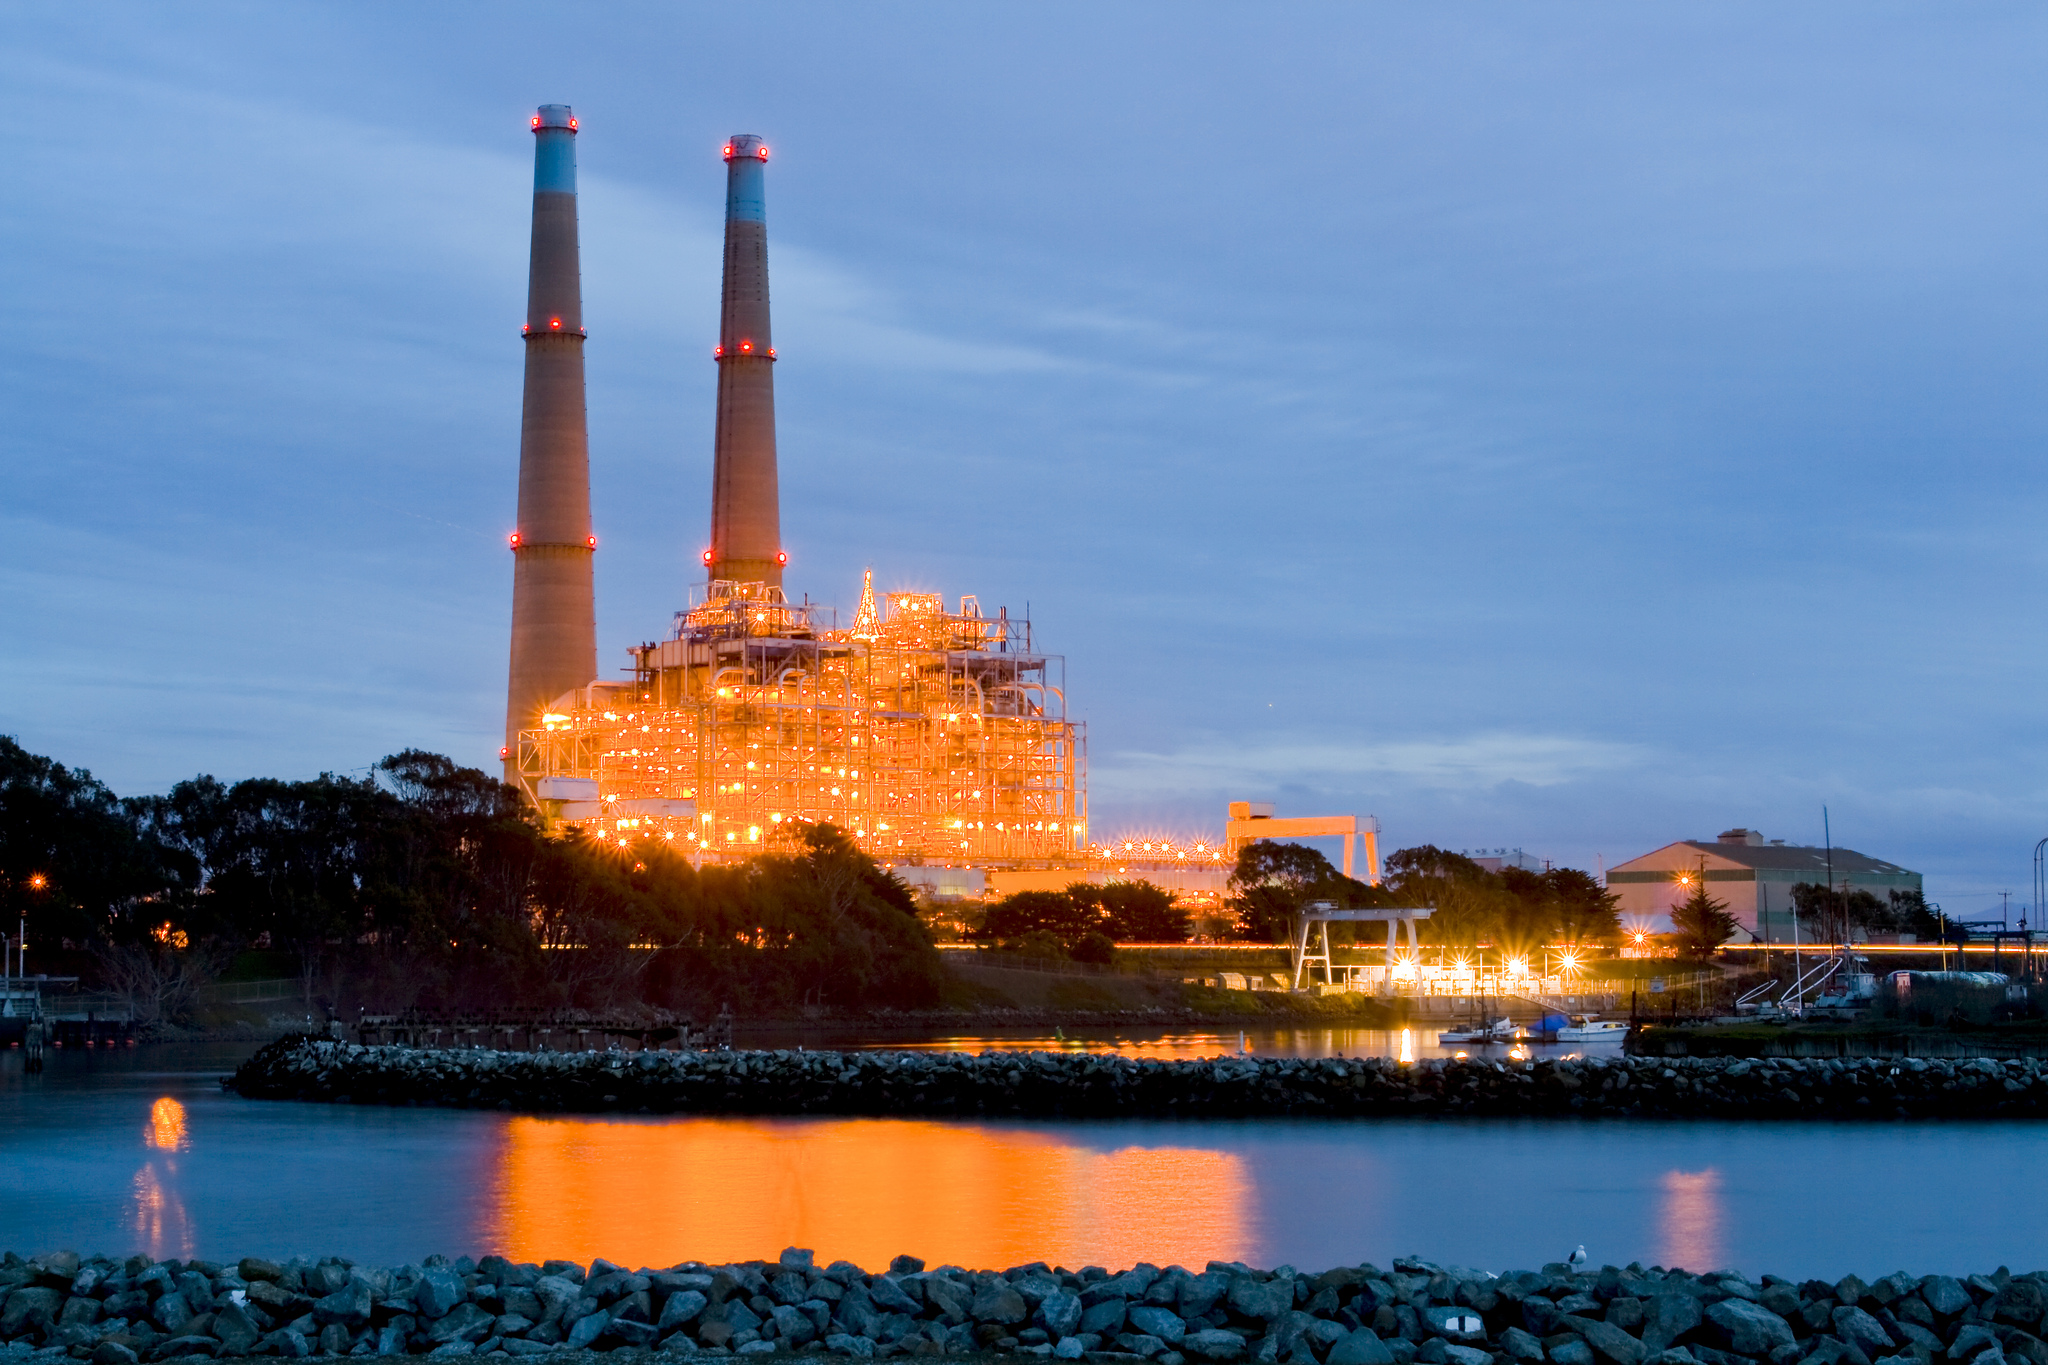 Image of the Moss Landing Power plant